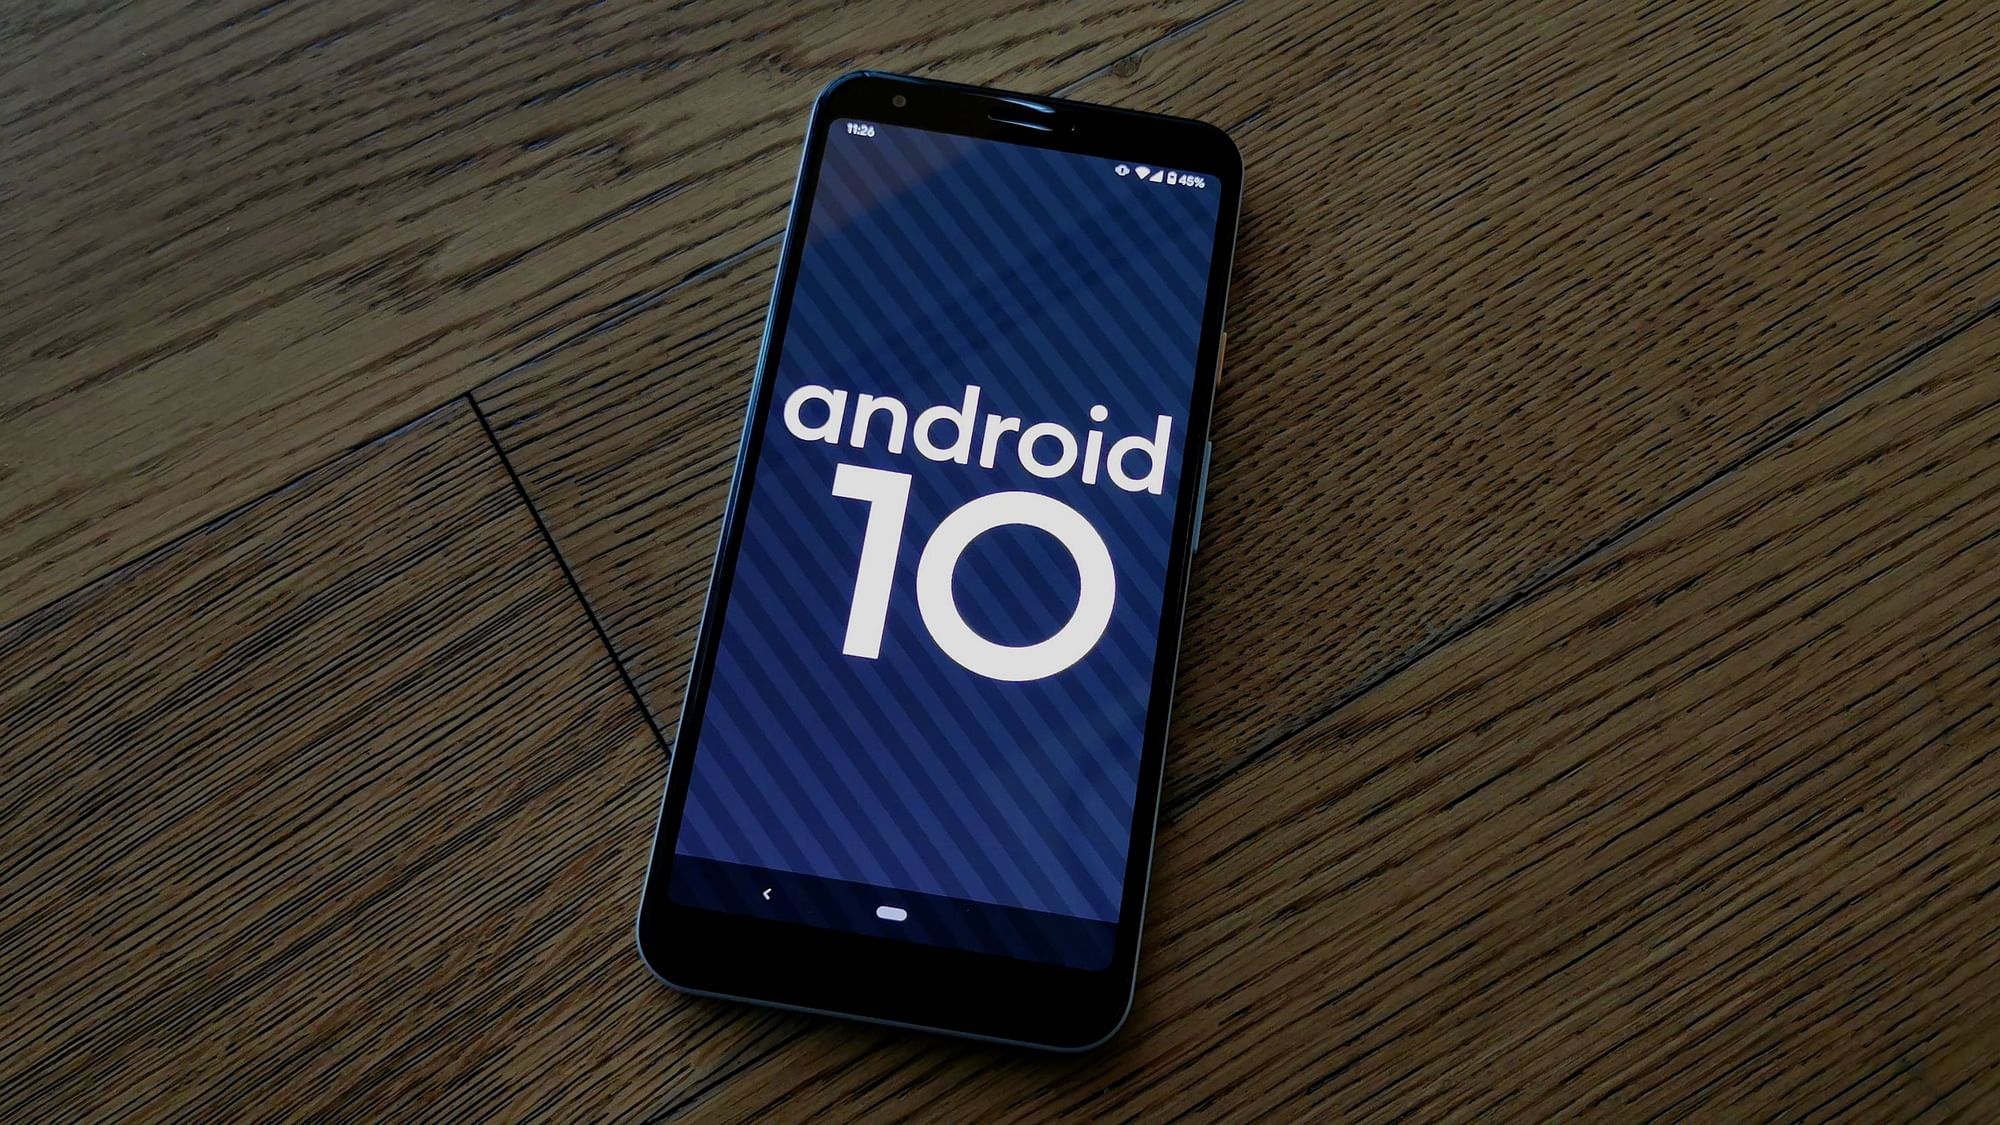 Android 10 stable version has released, but only for Pixel users.